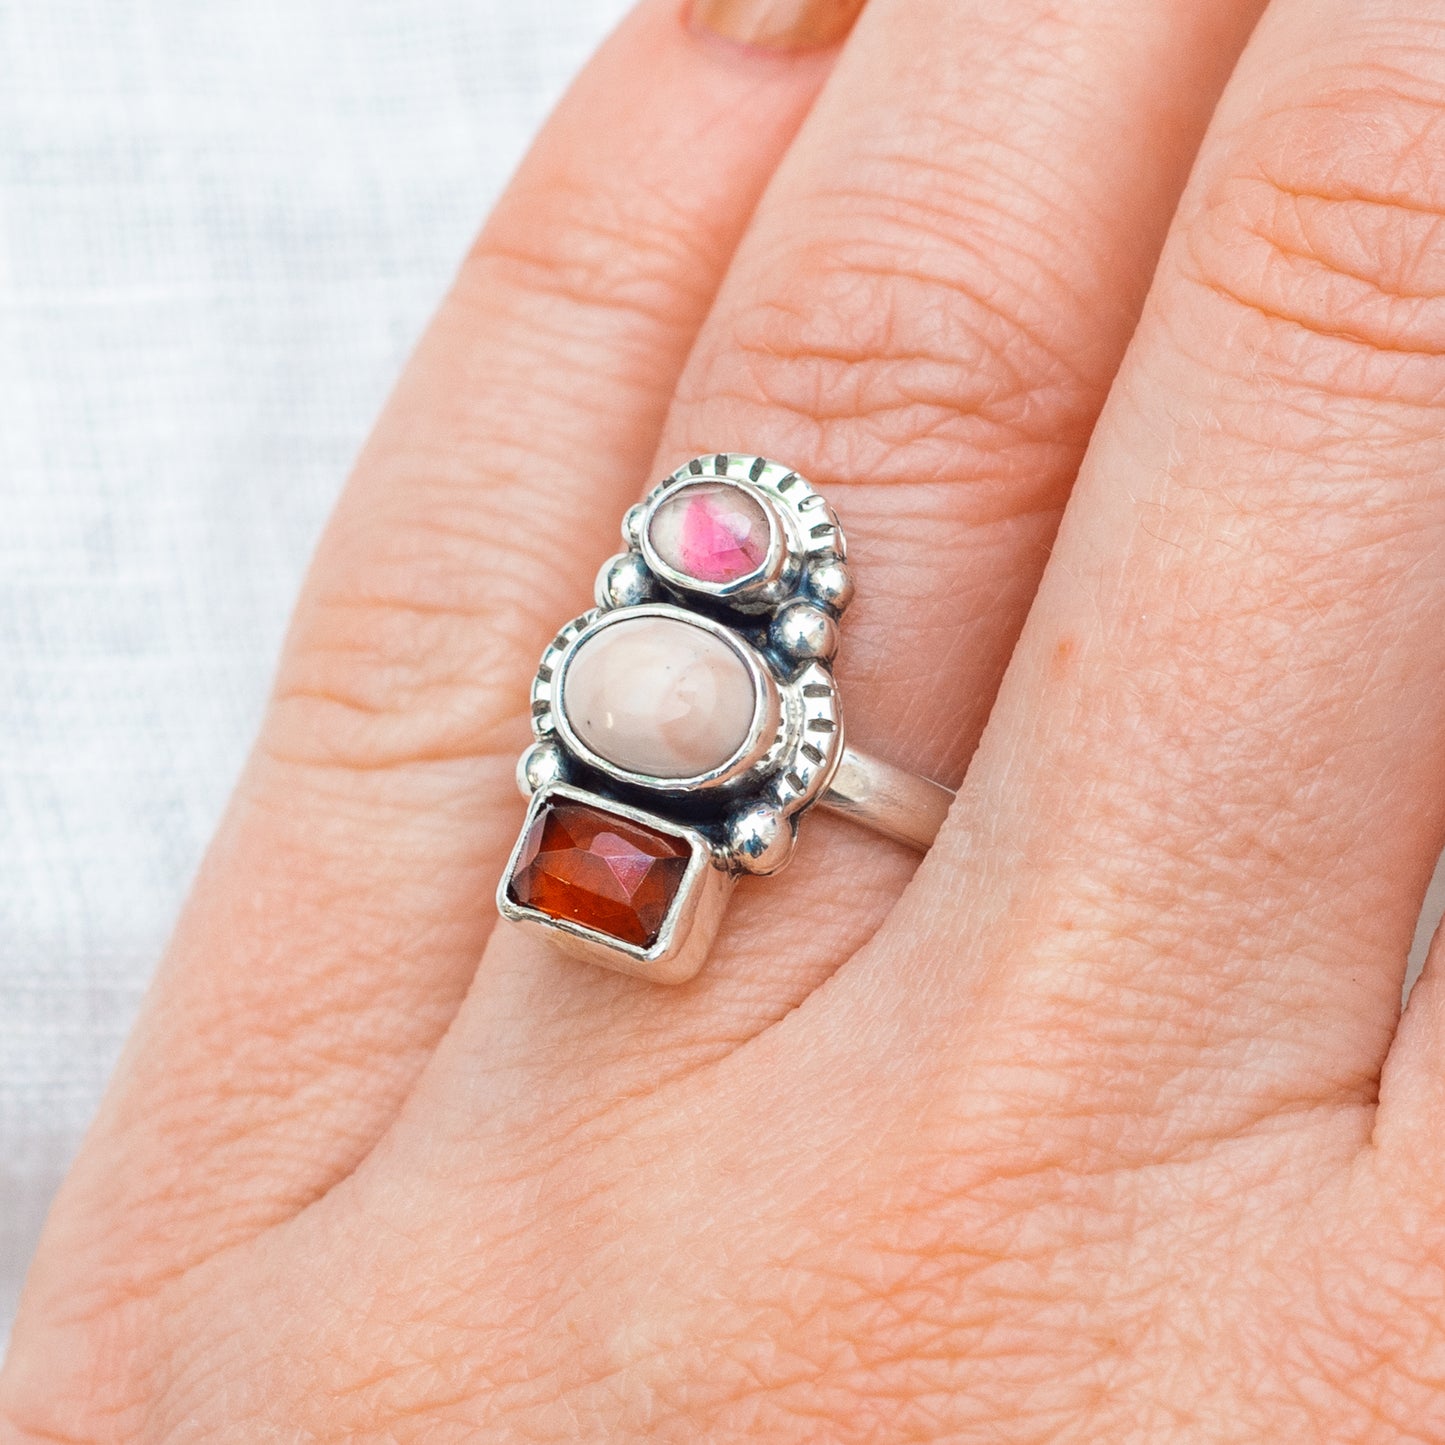 Trine Ring ◇ Faceted Tourmaline, Willow Creek Jasper + Red Garnet ◇ Size 7.5 ◇ Sterling Silver